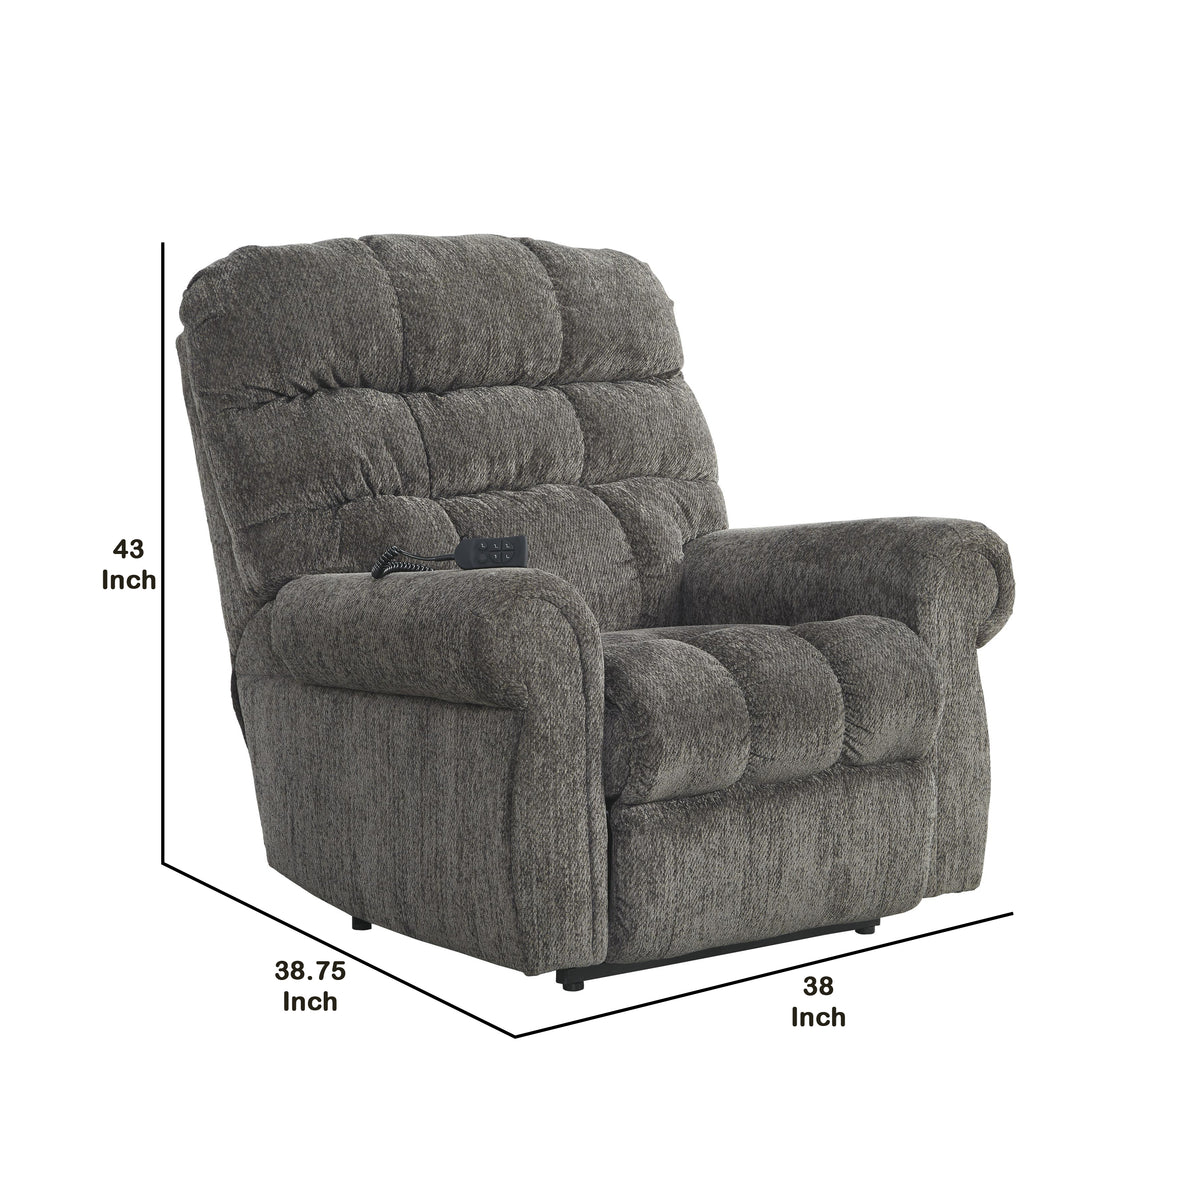 Upholstered Metal Frame Power Lift Recliner with Tufted Seat and Back in Gray - BM209297